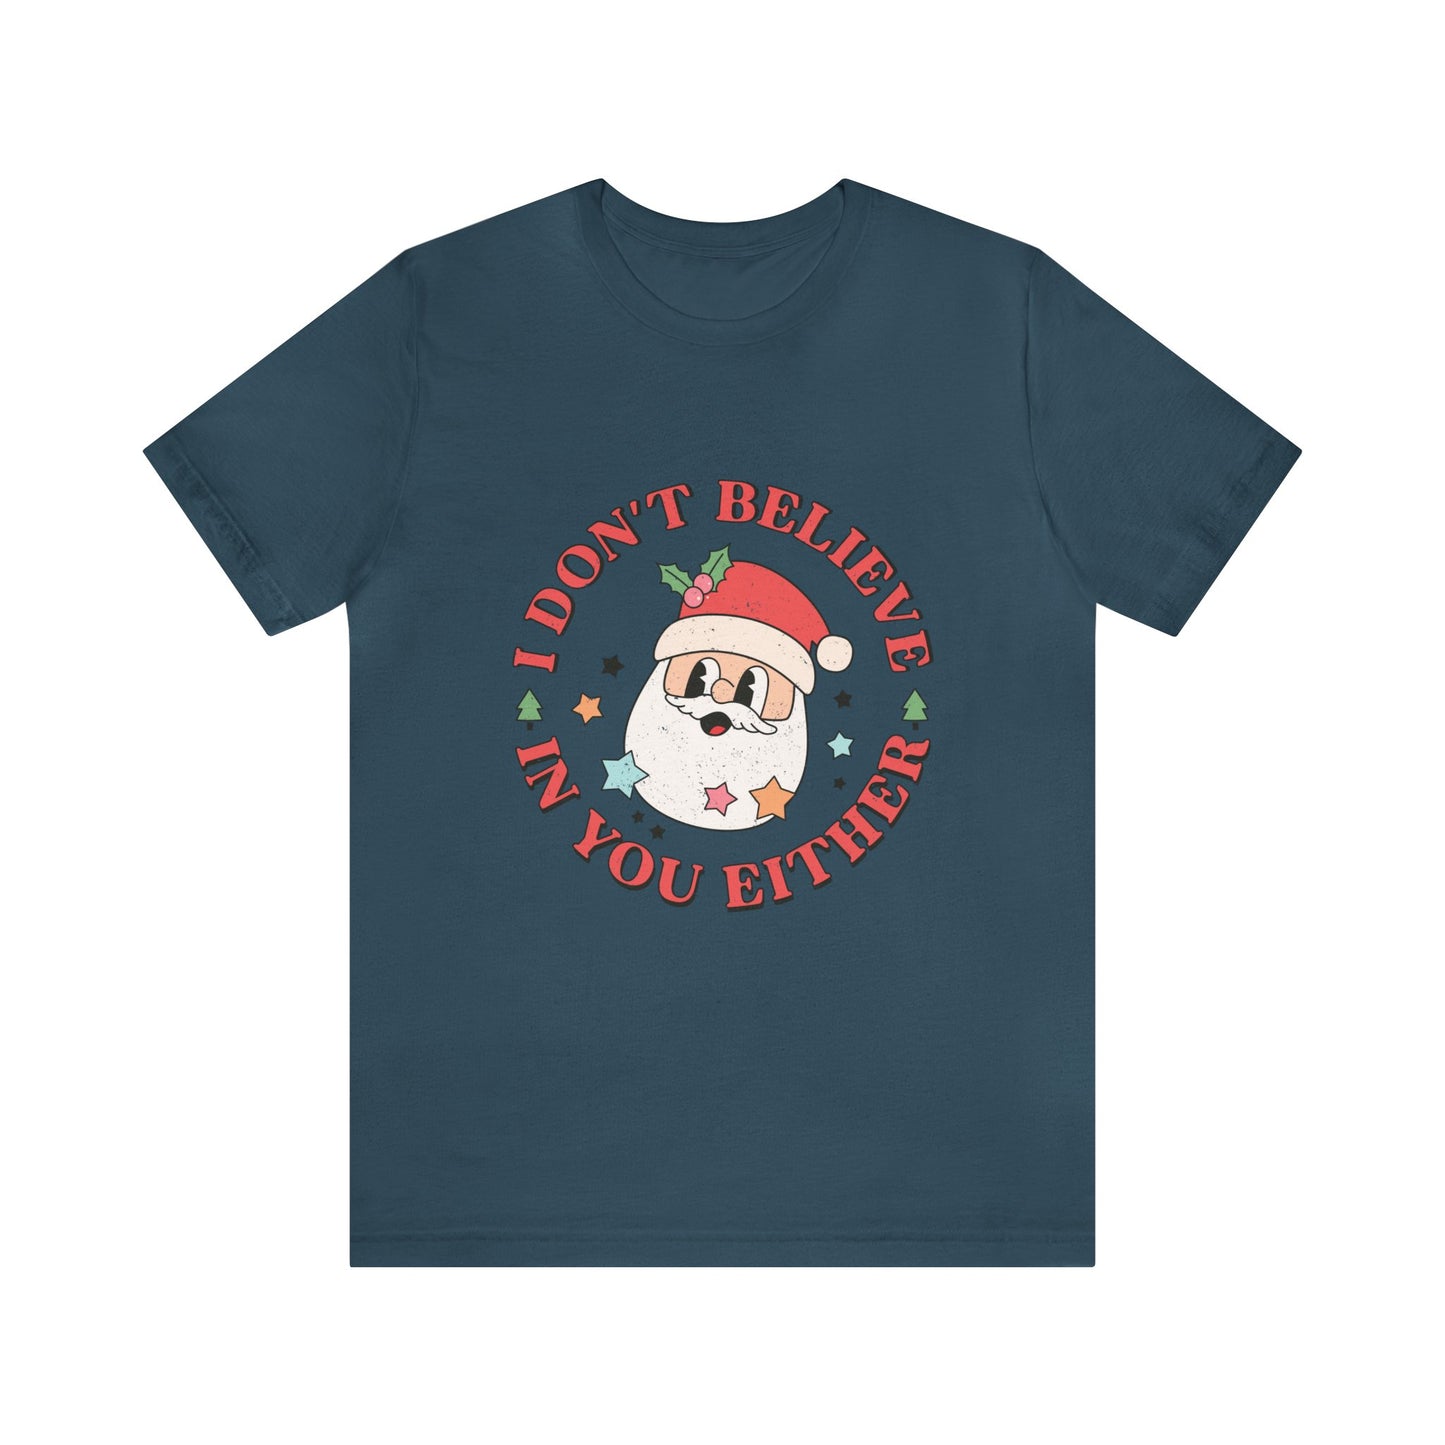 I don't believe in you either Women's funny Short Sleeve Santa Christmas T Shirts